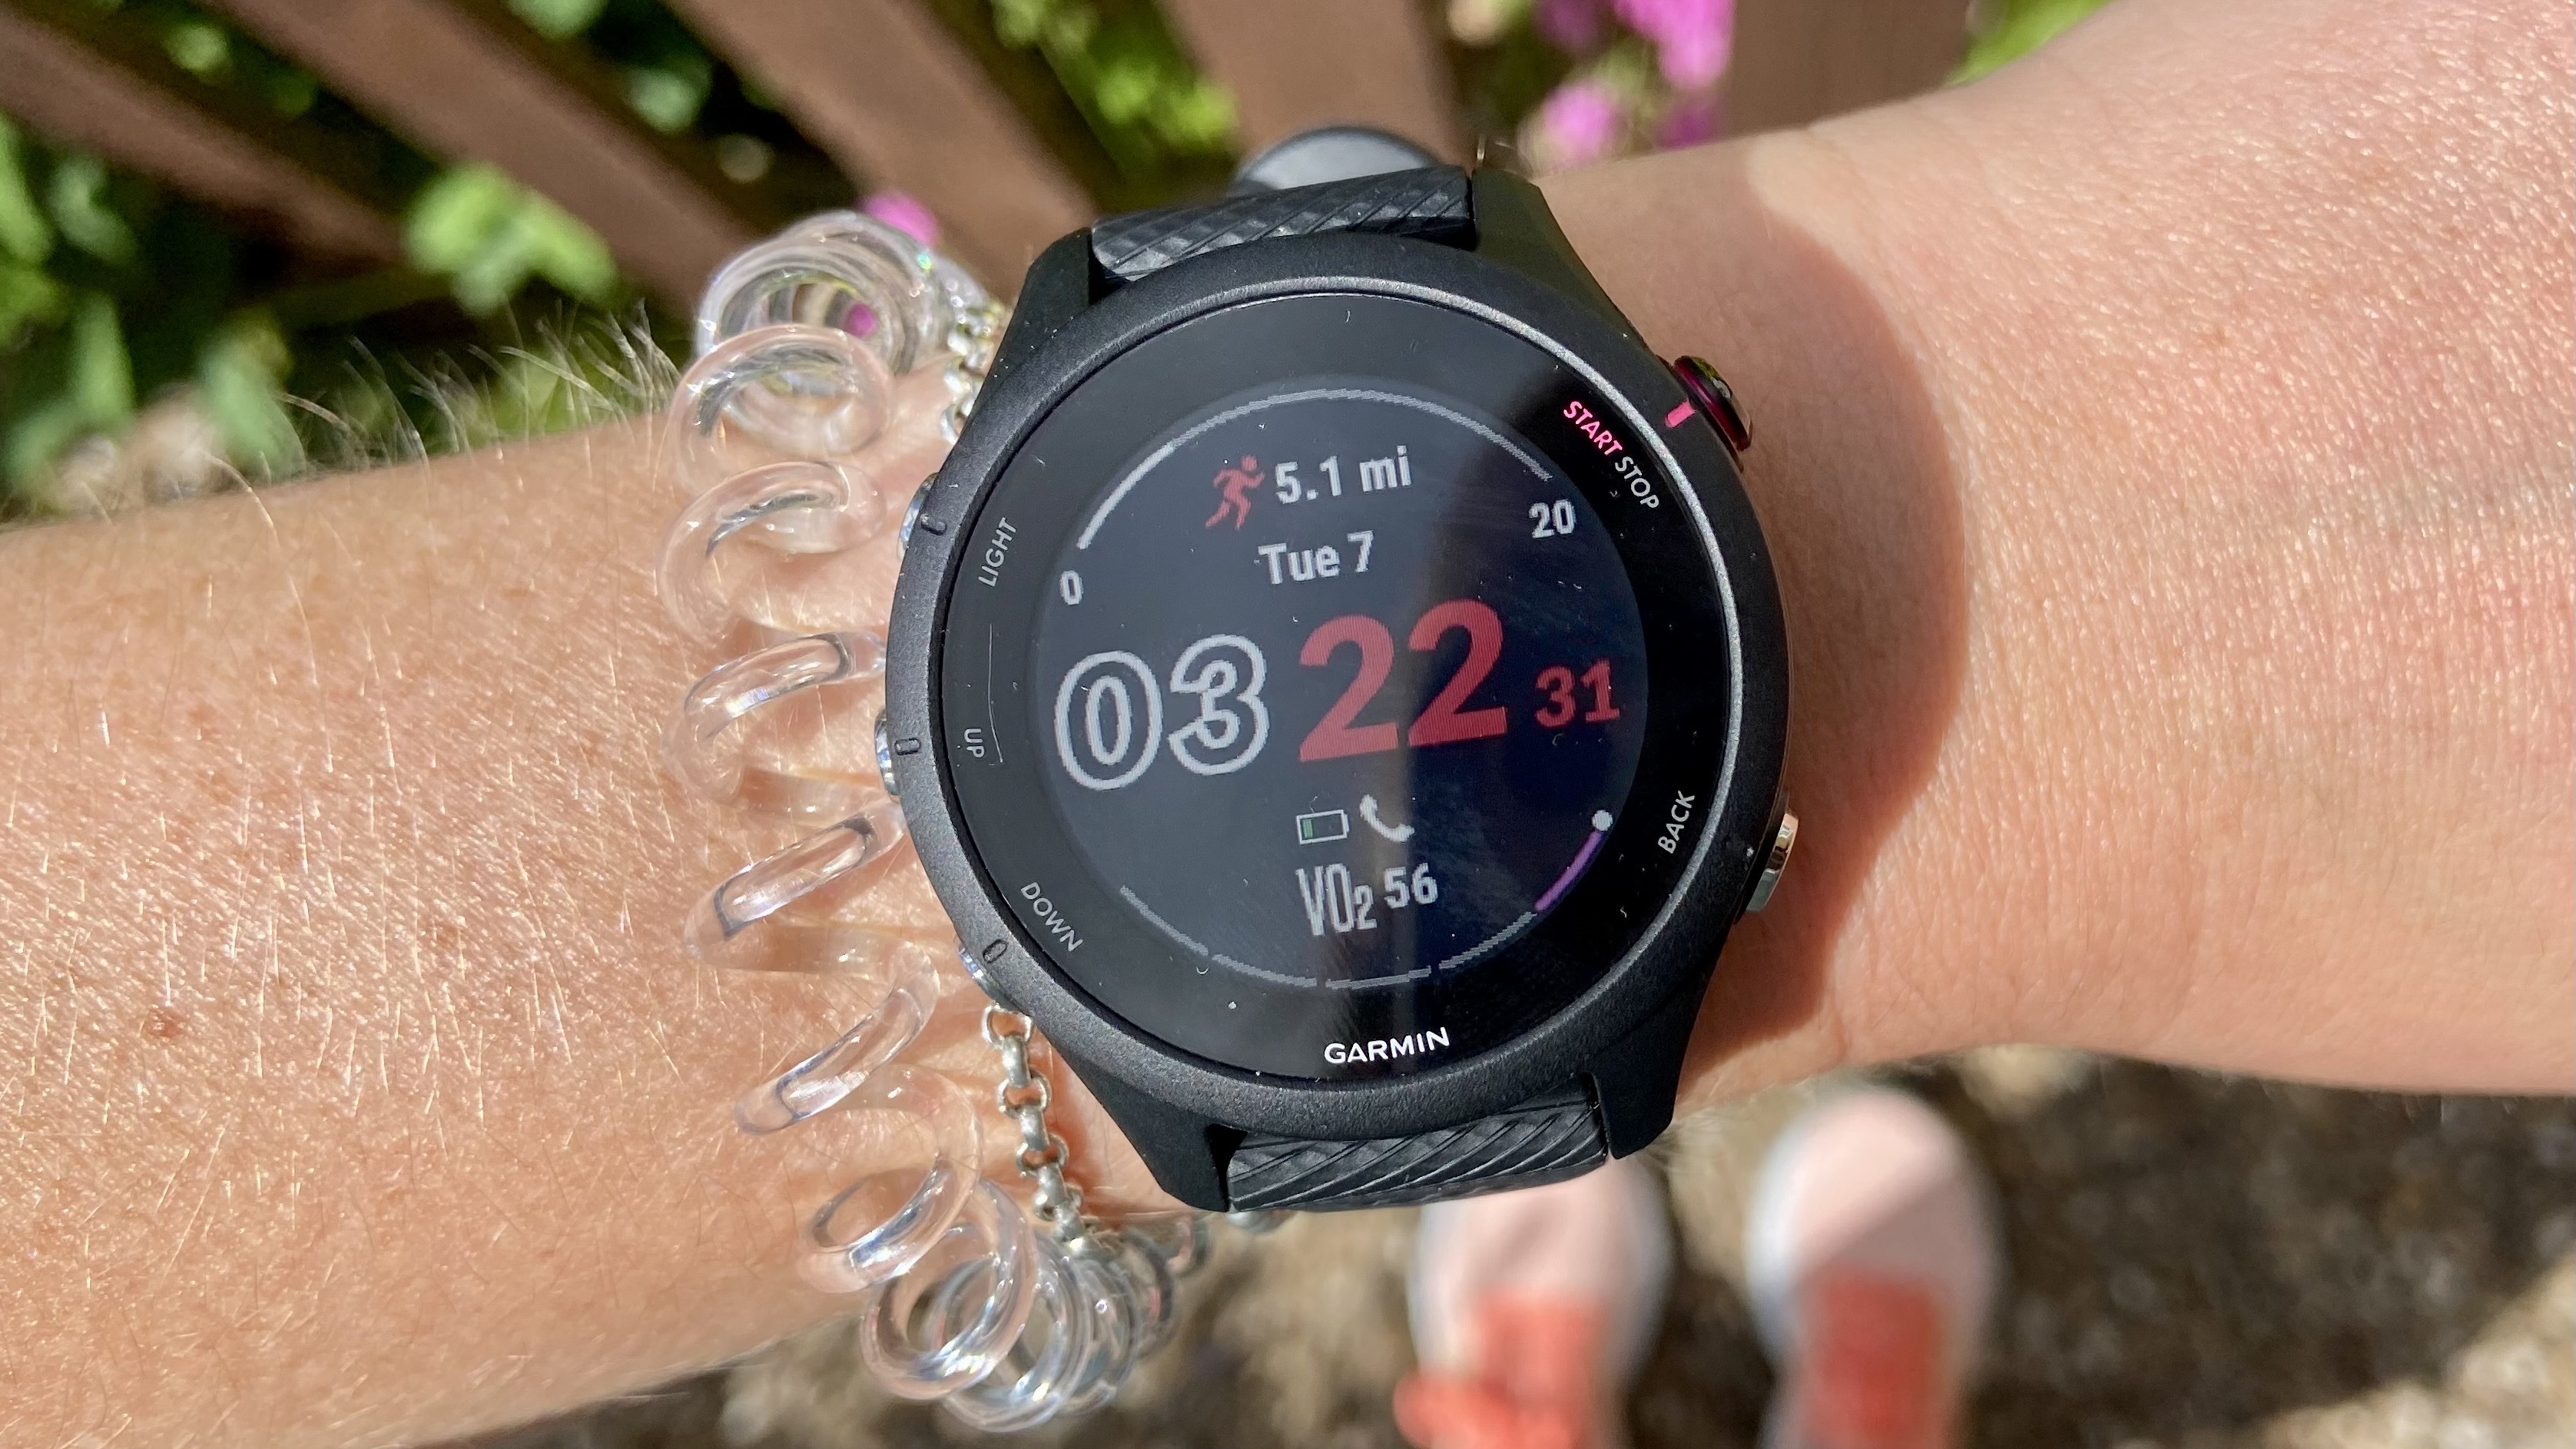 renere billedtekst Bøde How to download a free 5K training plan to your Garmin Watch | Tom's Guide